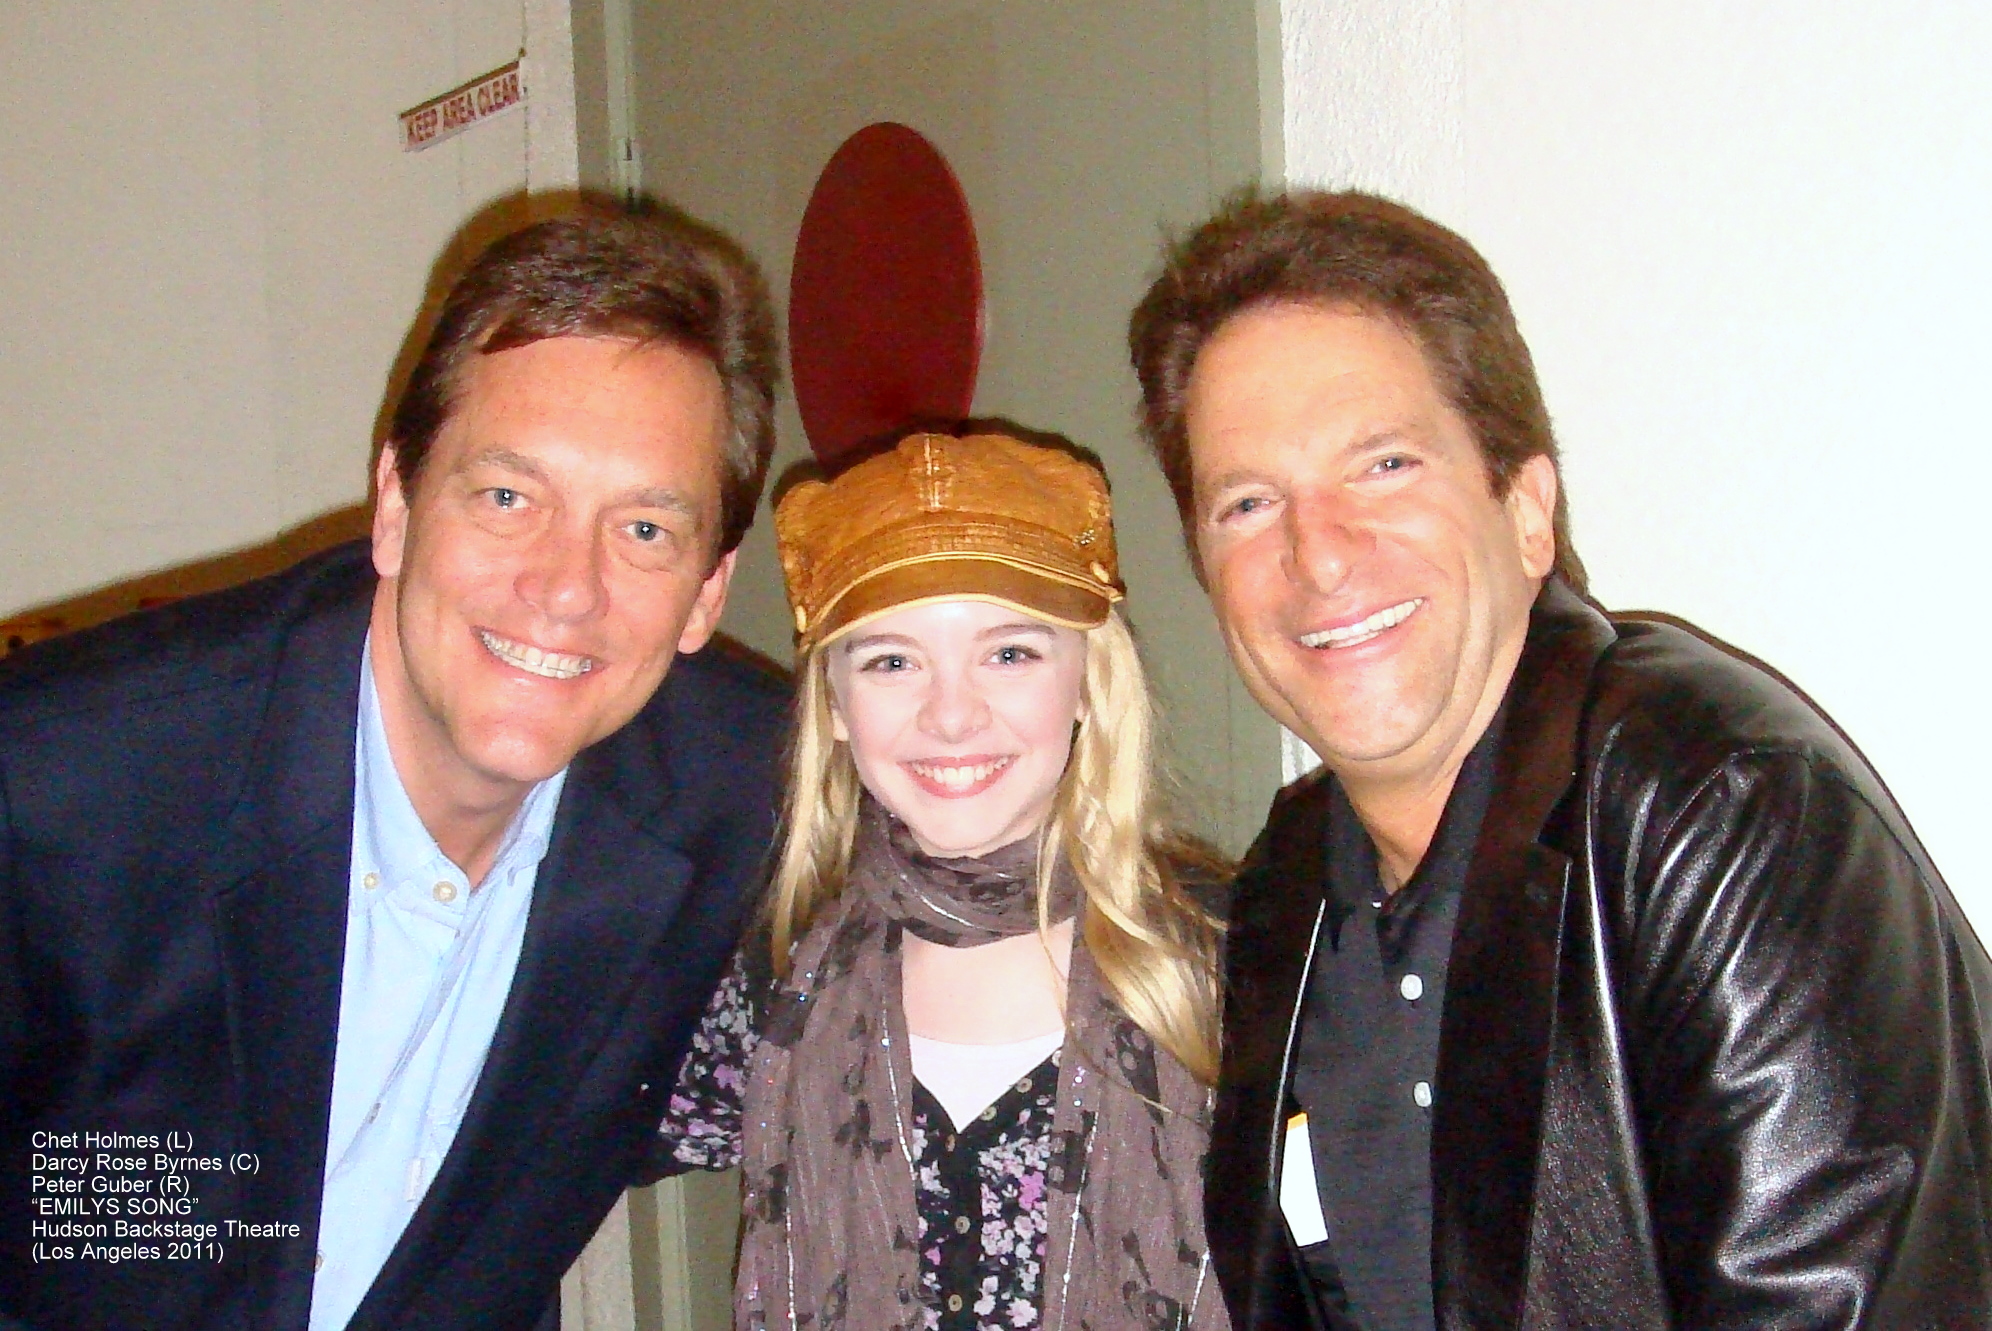 Chet Holmes, Darcy Rose Byrnes and Peter Guber at the Hudson Backstage Theatre,(Los Angeles) following performance of 